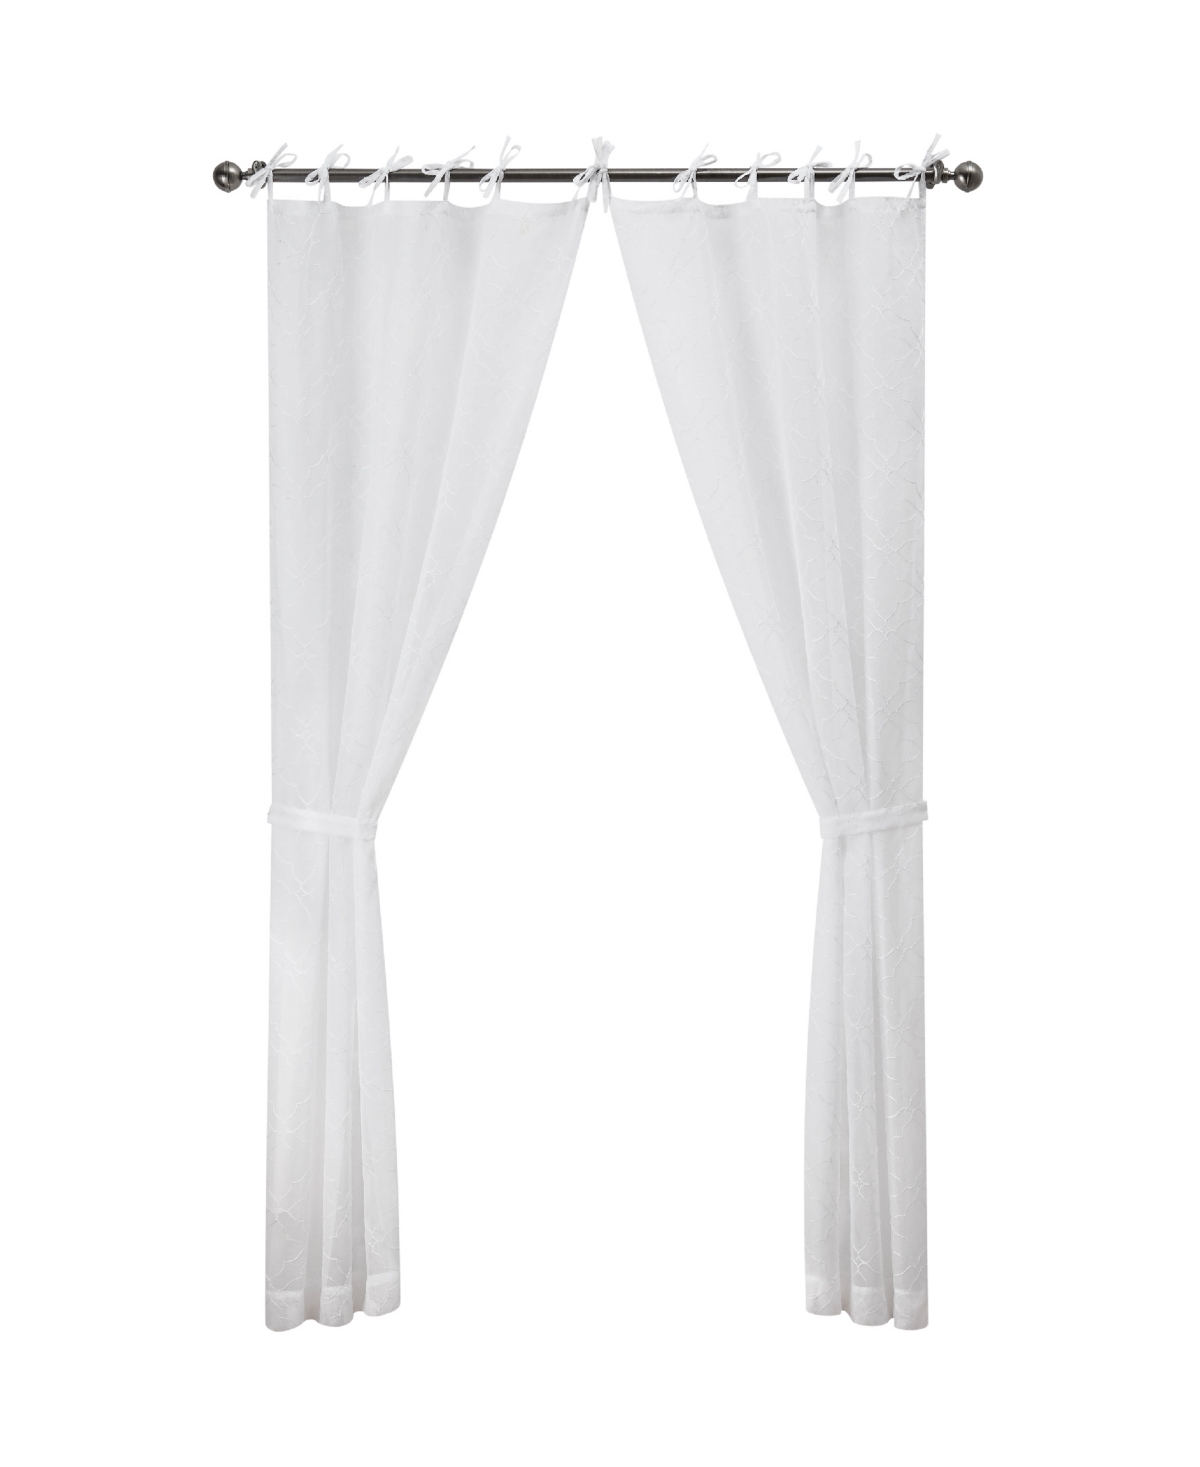 Jessica Simpson Nora Embroidery Sheer Tie Top Window Curtain Panel Pair With Tiebacks, 38" X 96" In White